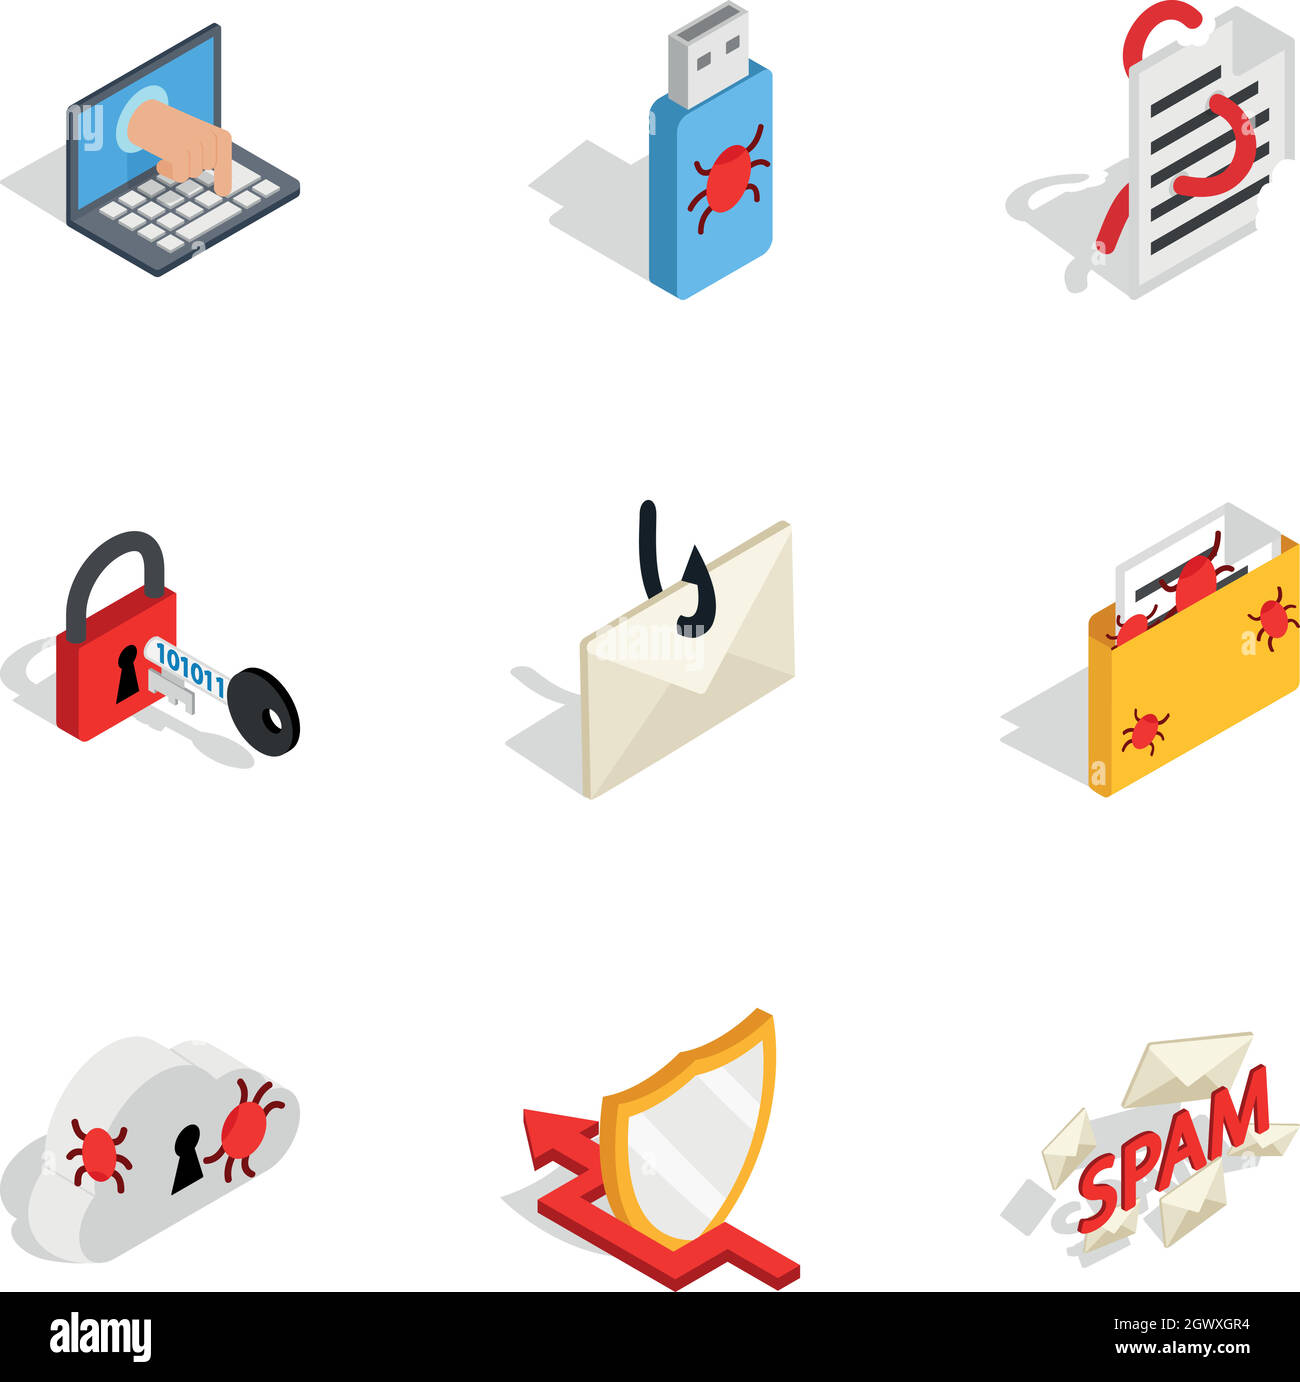 Computer security icons, isometric 3d style Stock Vector